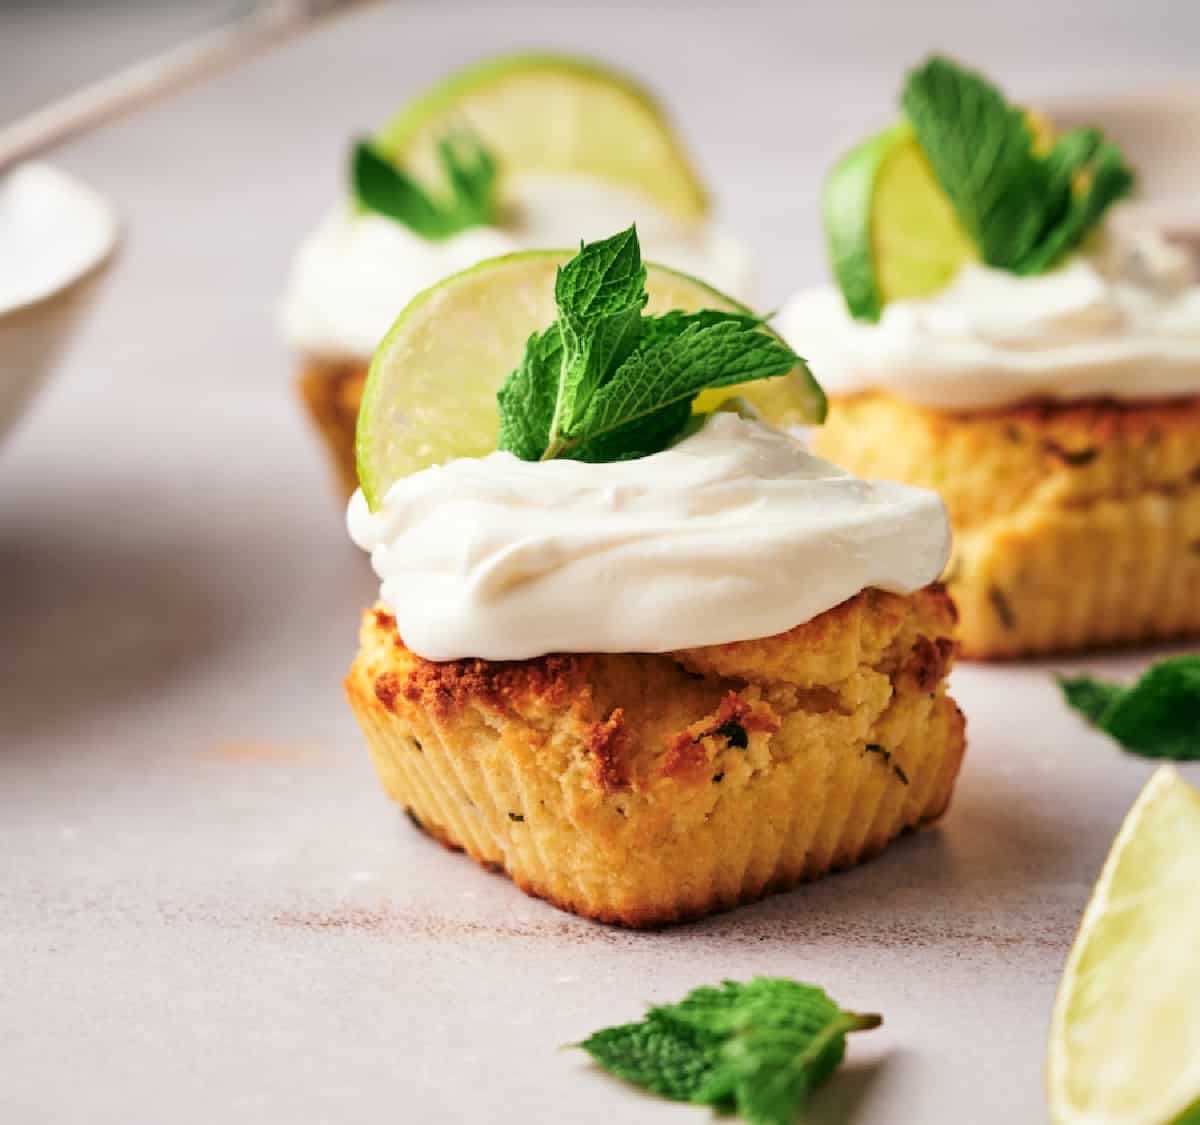 Homemade mojito-themed cupcakes, garnished with cream cheese frosting, a lemon wedge, and mint leaves.